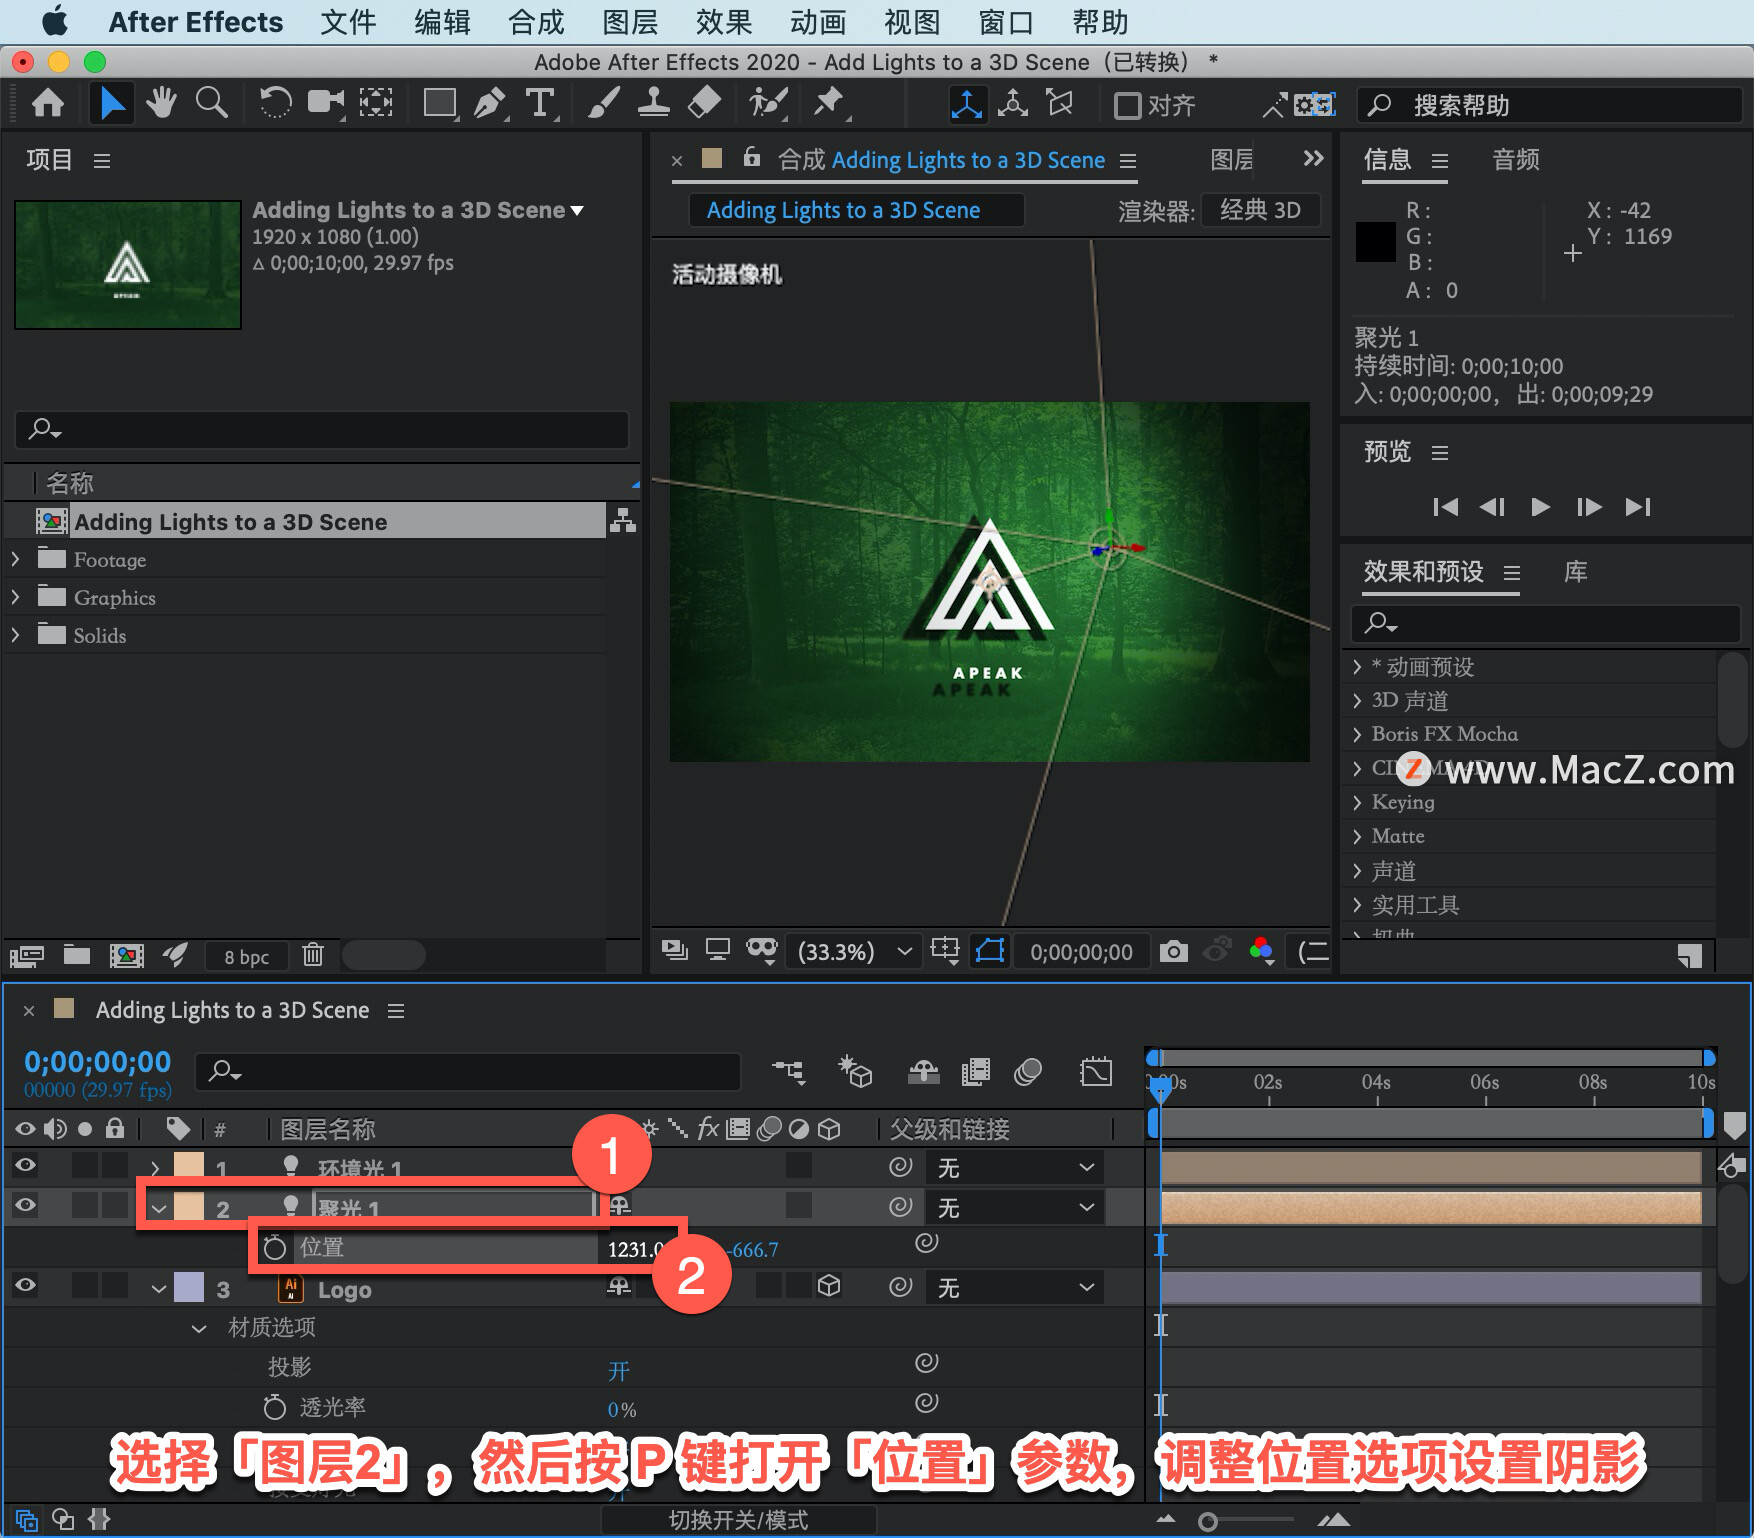 After Effects 教程「54」，如何在 After Effects 中将灯光添加到 3D 场景？